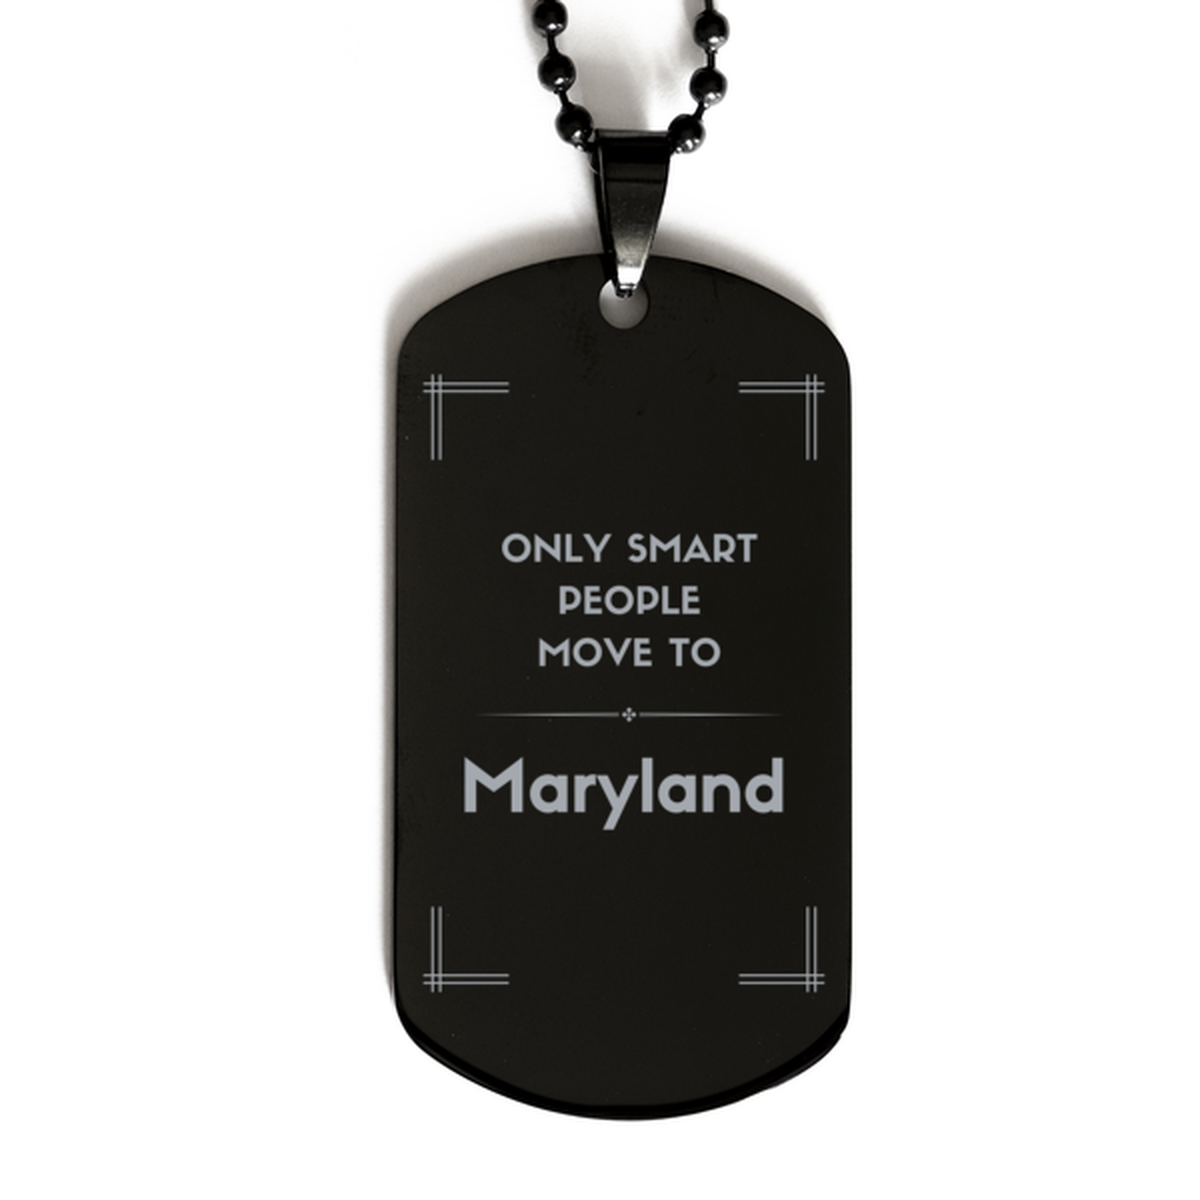 Only smart people move to Maryland Black Dog Tag, Gag Gifts For Maryland, Move to Maryland Gifts for Friends Coworker Funny Saying Quote